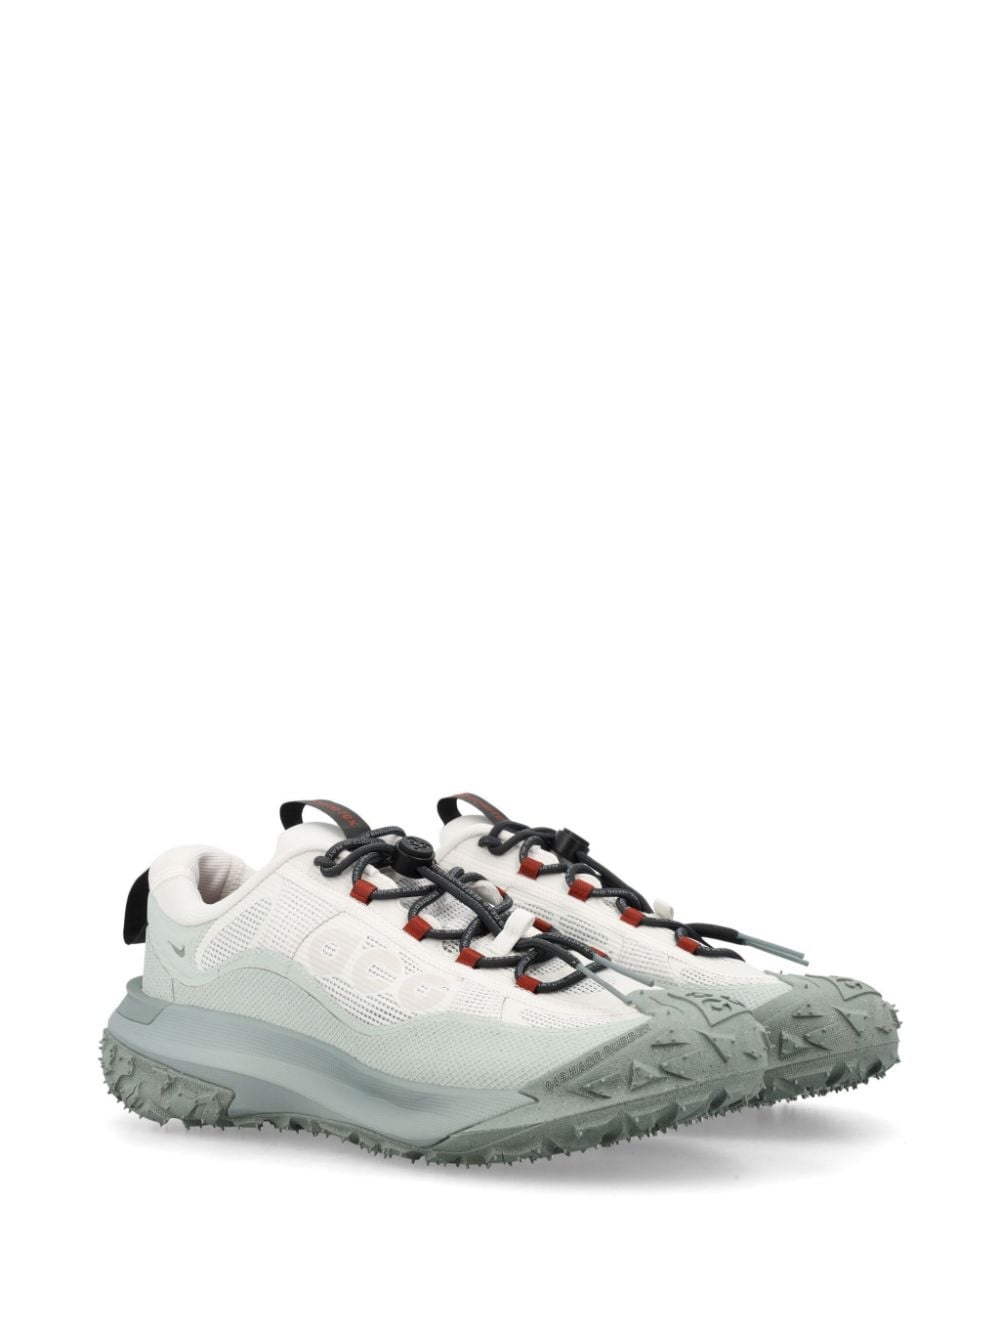 Nike ACG Mountain Fly 2 Low GORE-TEX sneakers - 2